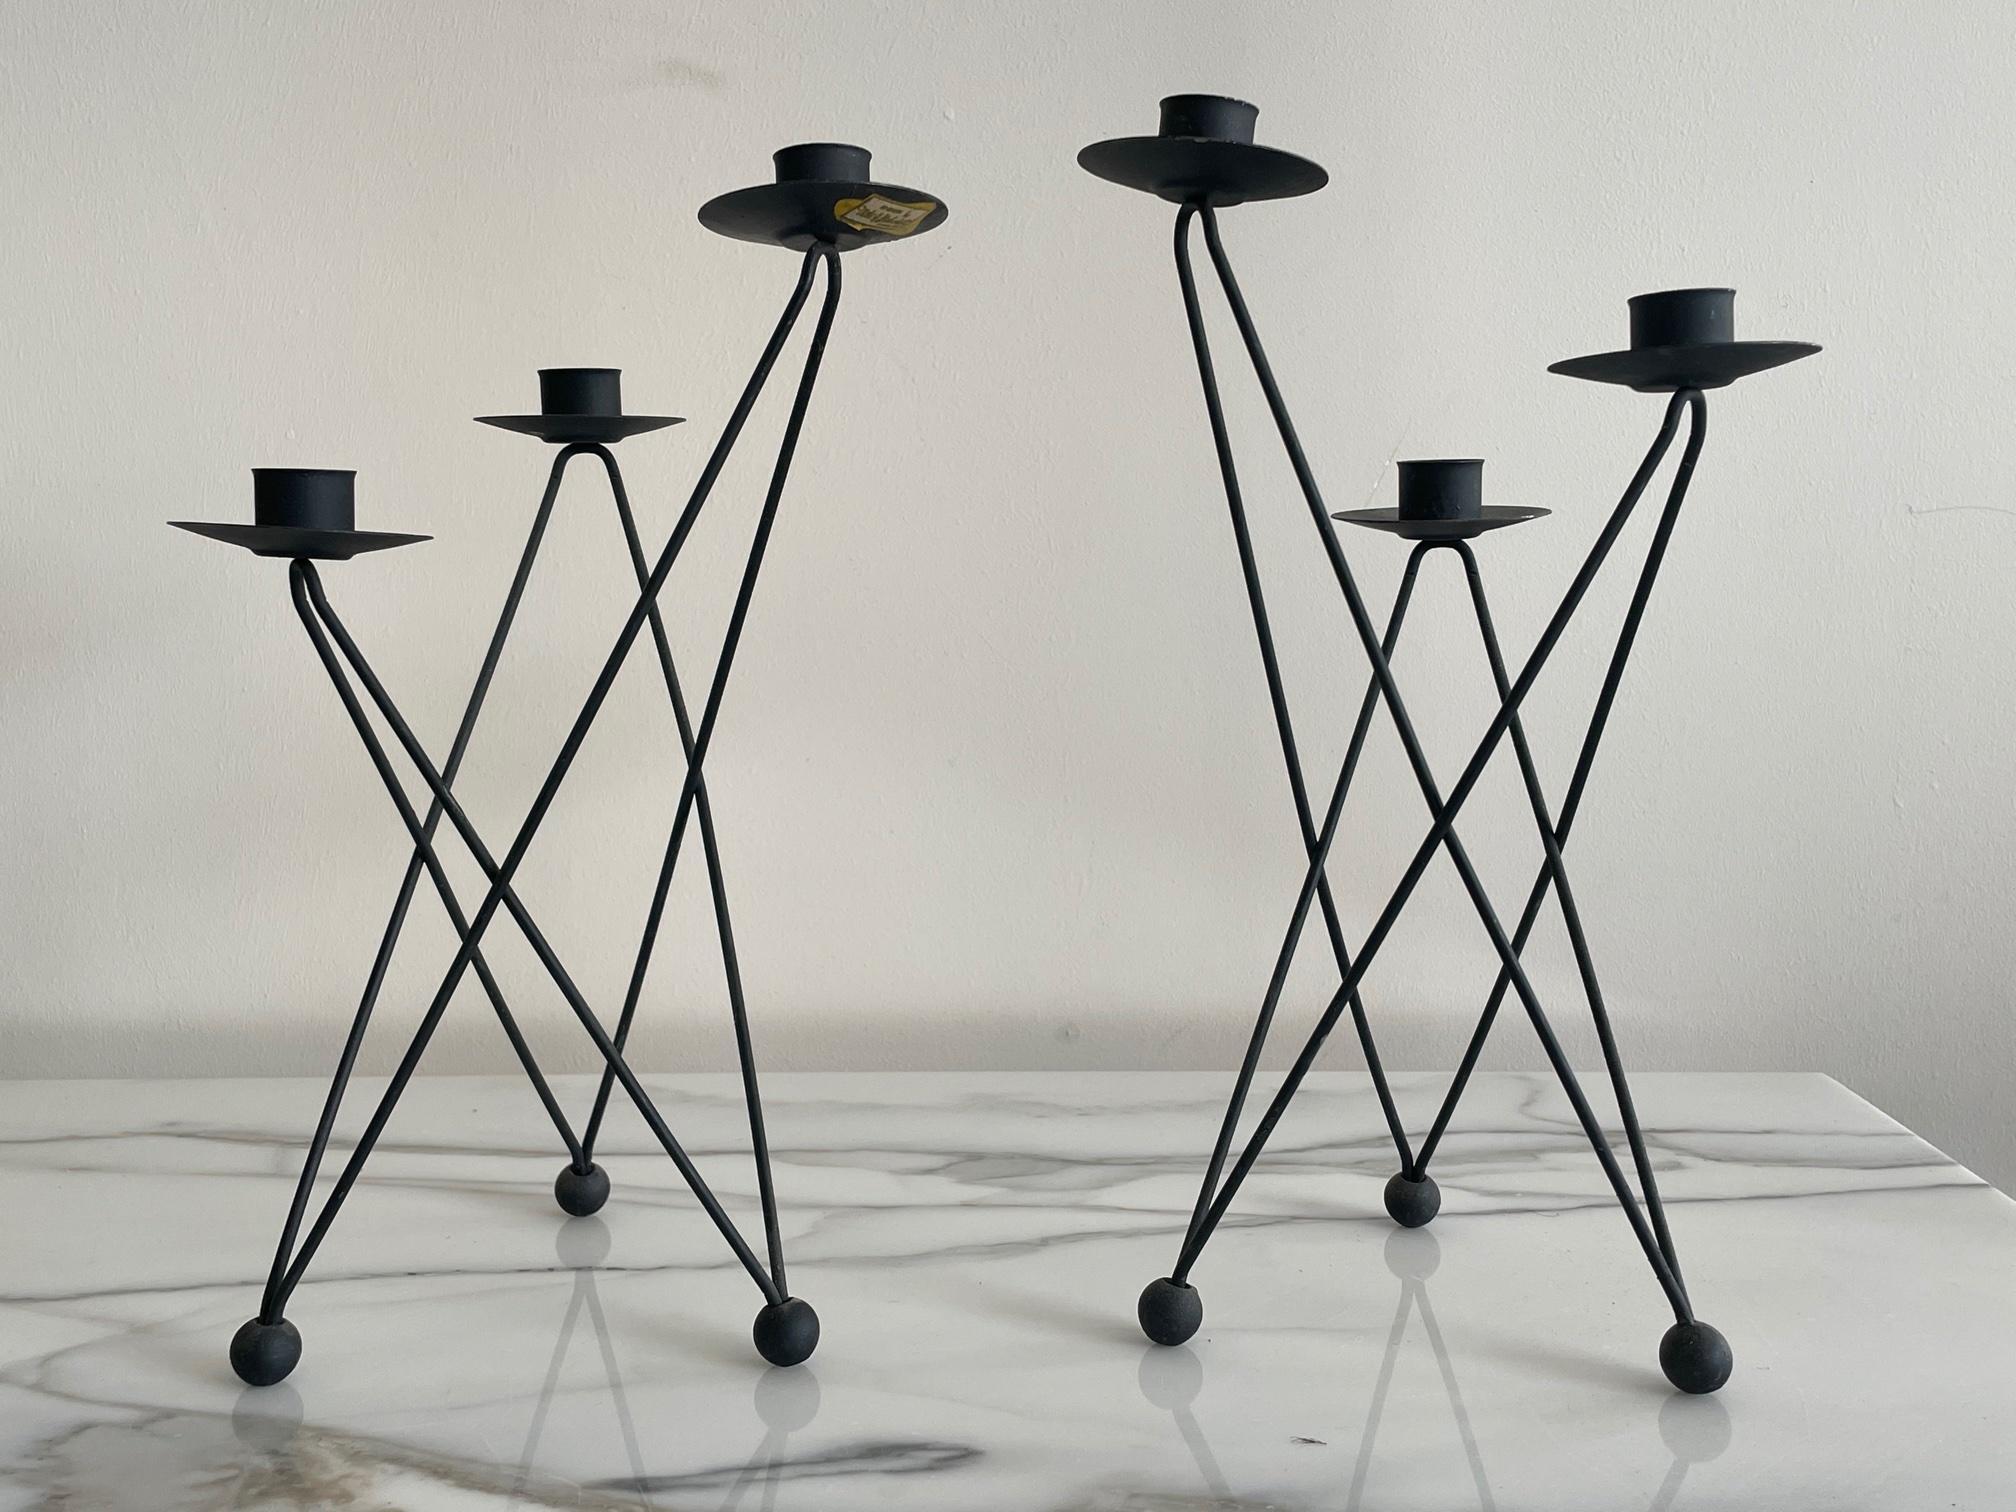 A pair of Atomic 1950's candleholders by Victor H.Bisharat, a Jordanian born architect, active in California in the 1950's. One retains original label.